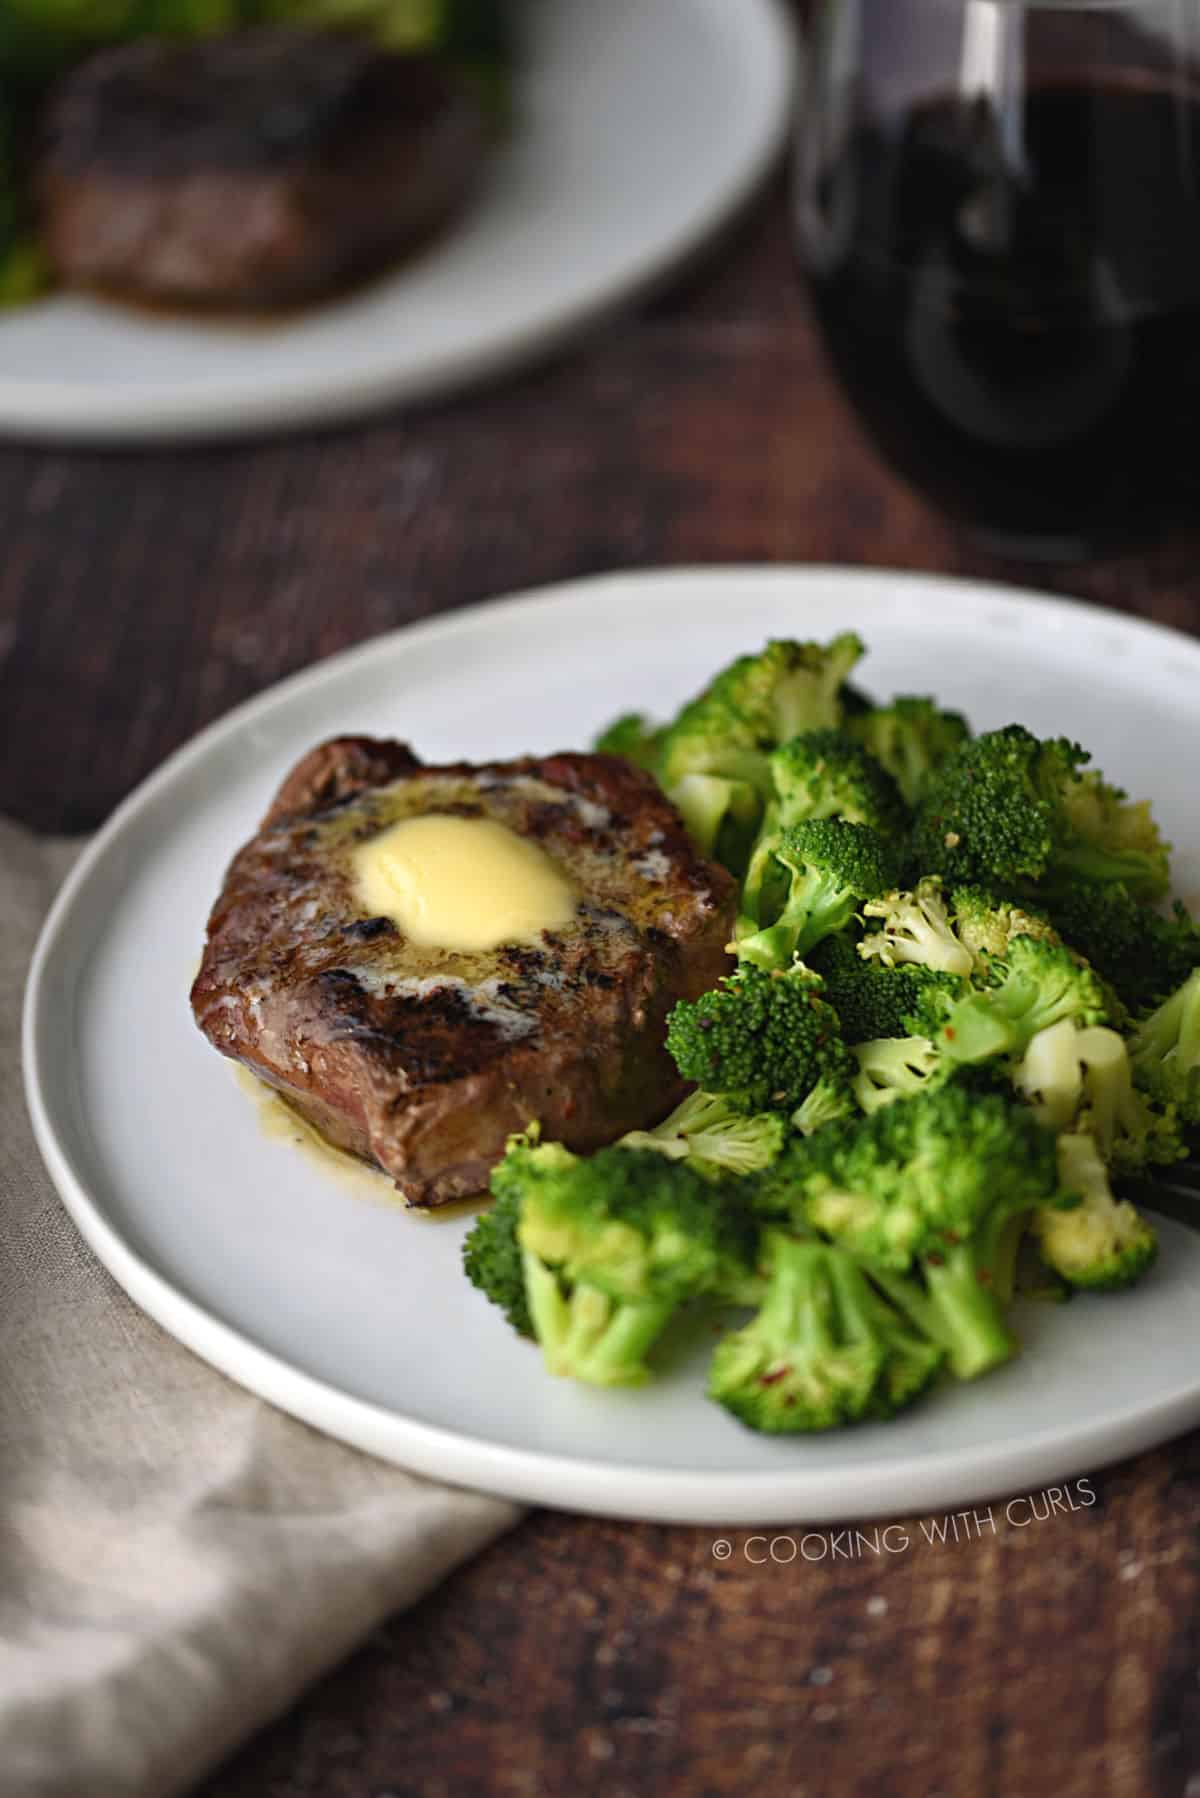 a butter topped filet next to a pile of broccoli florets on a white plate, with a glass of red wine and a second plate in the background.